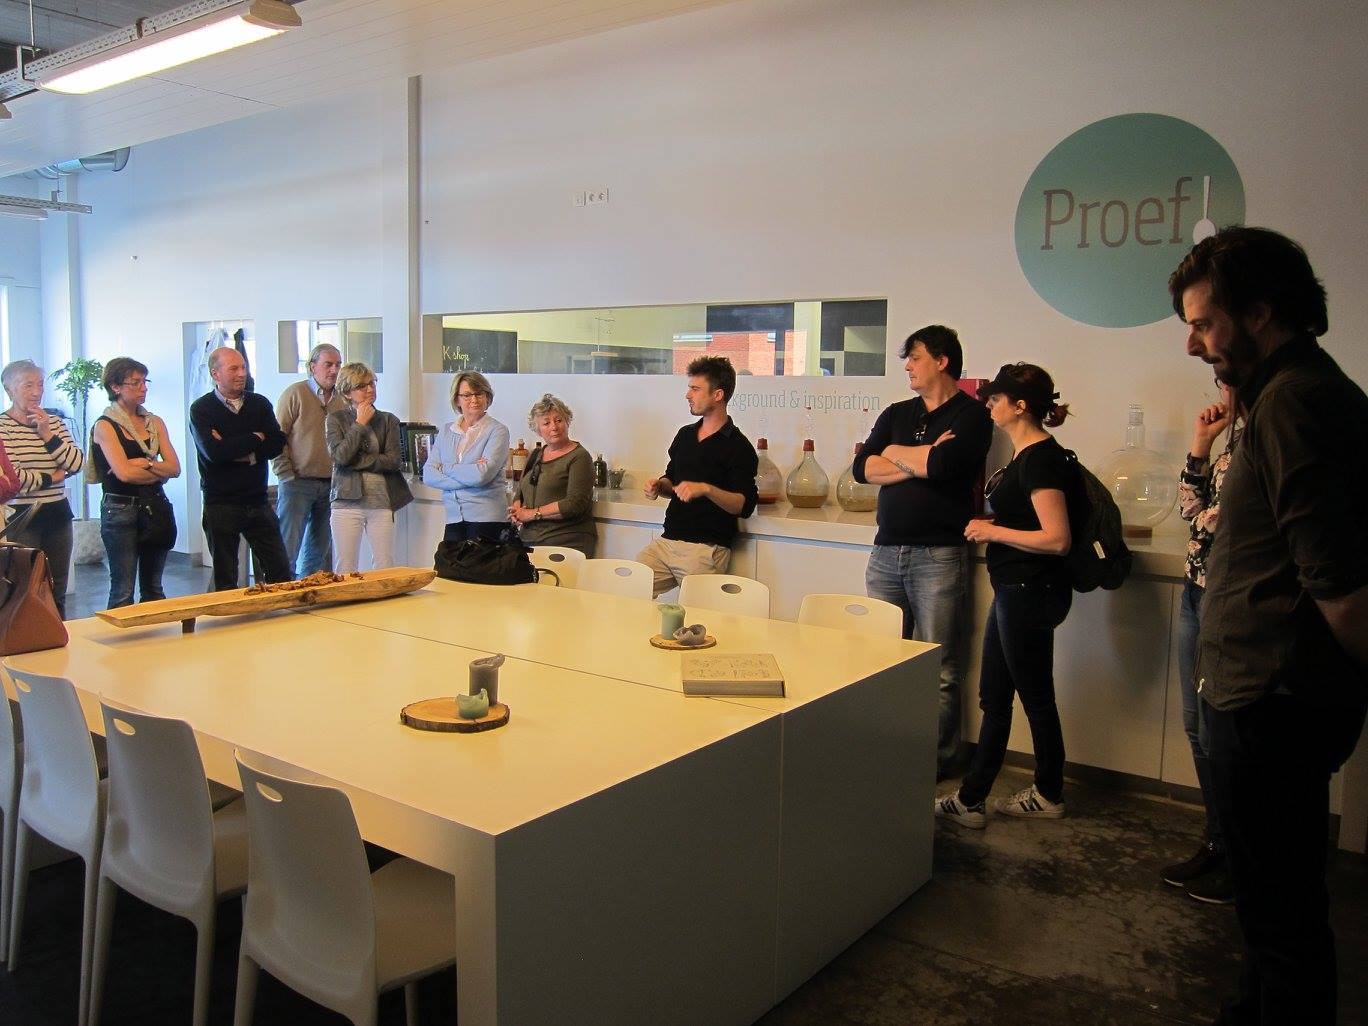 WORKSHOP @ Proef, Picture by Proef